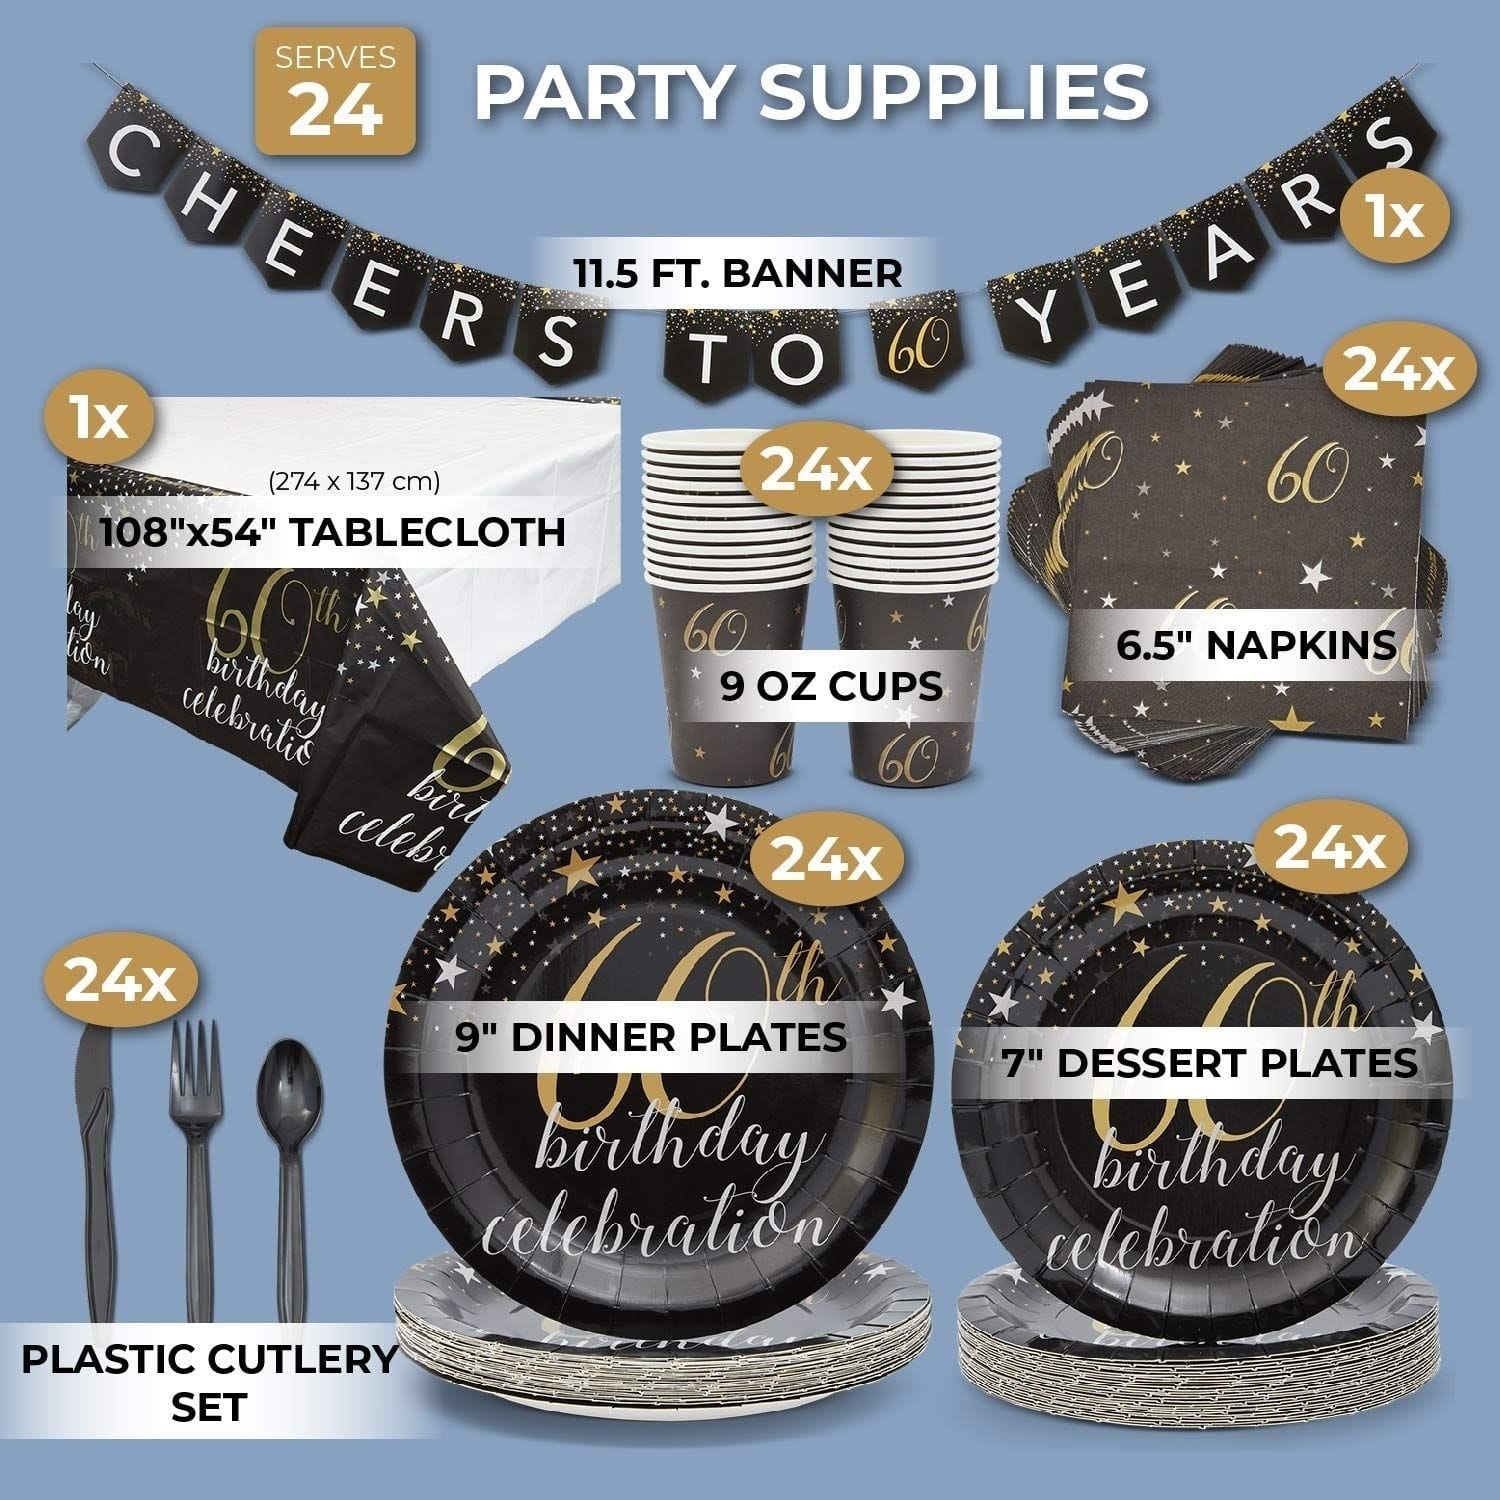 Serves 24 60th Birthday Party Supplies Decorations for Men Women - On ...